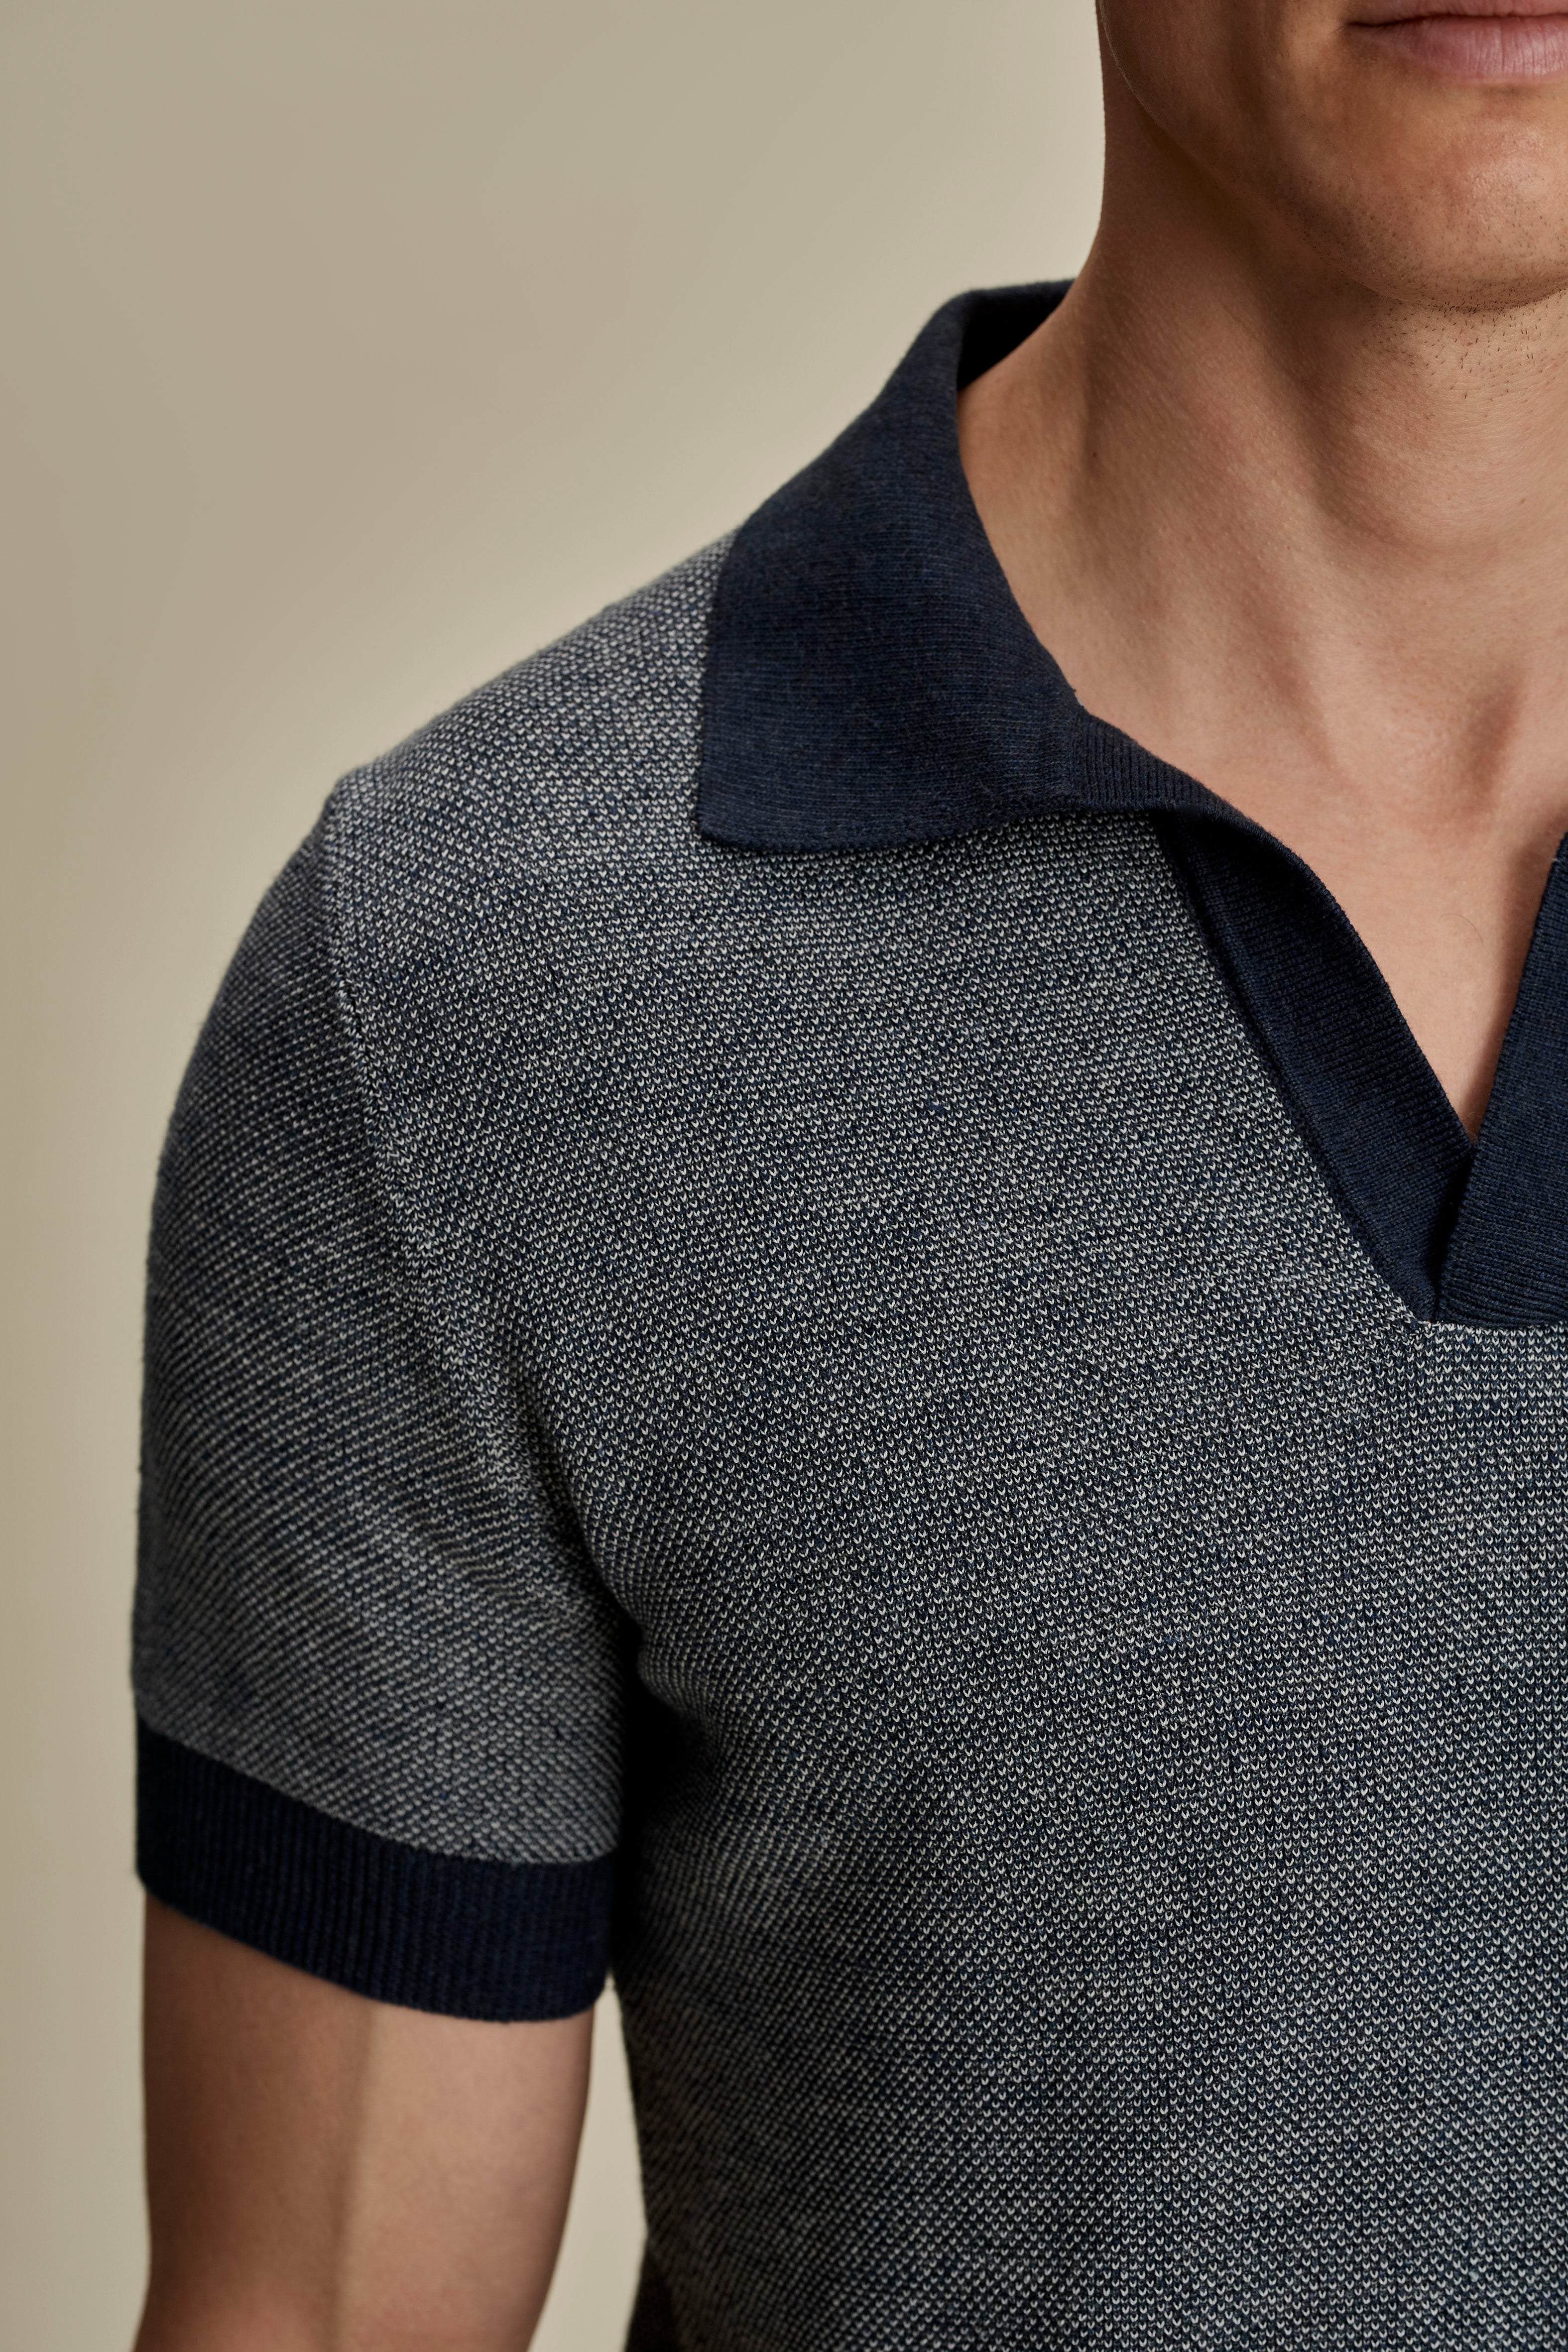 Cotton Linen Contrast Knitted Polo Shirt Dark Navy Detail Model Image